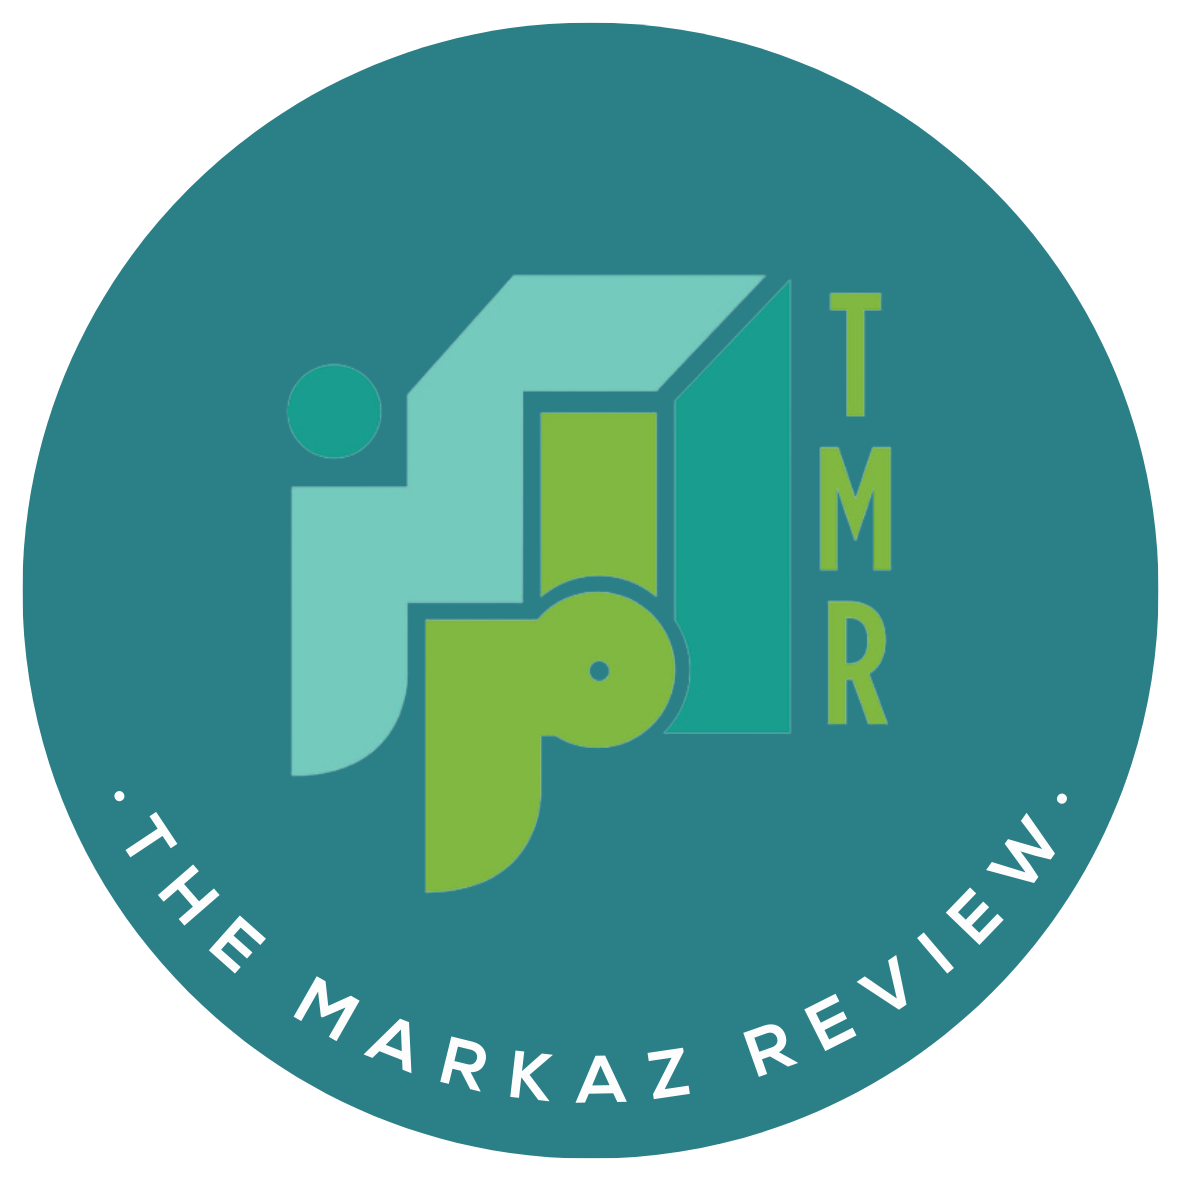 The Markaz Review